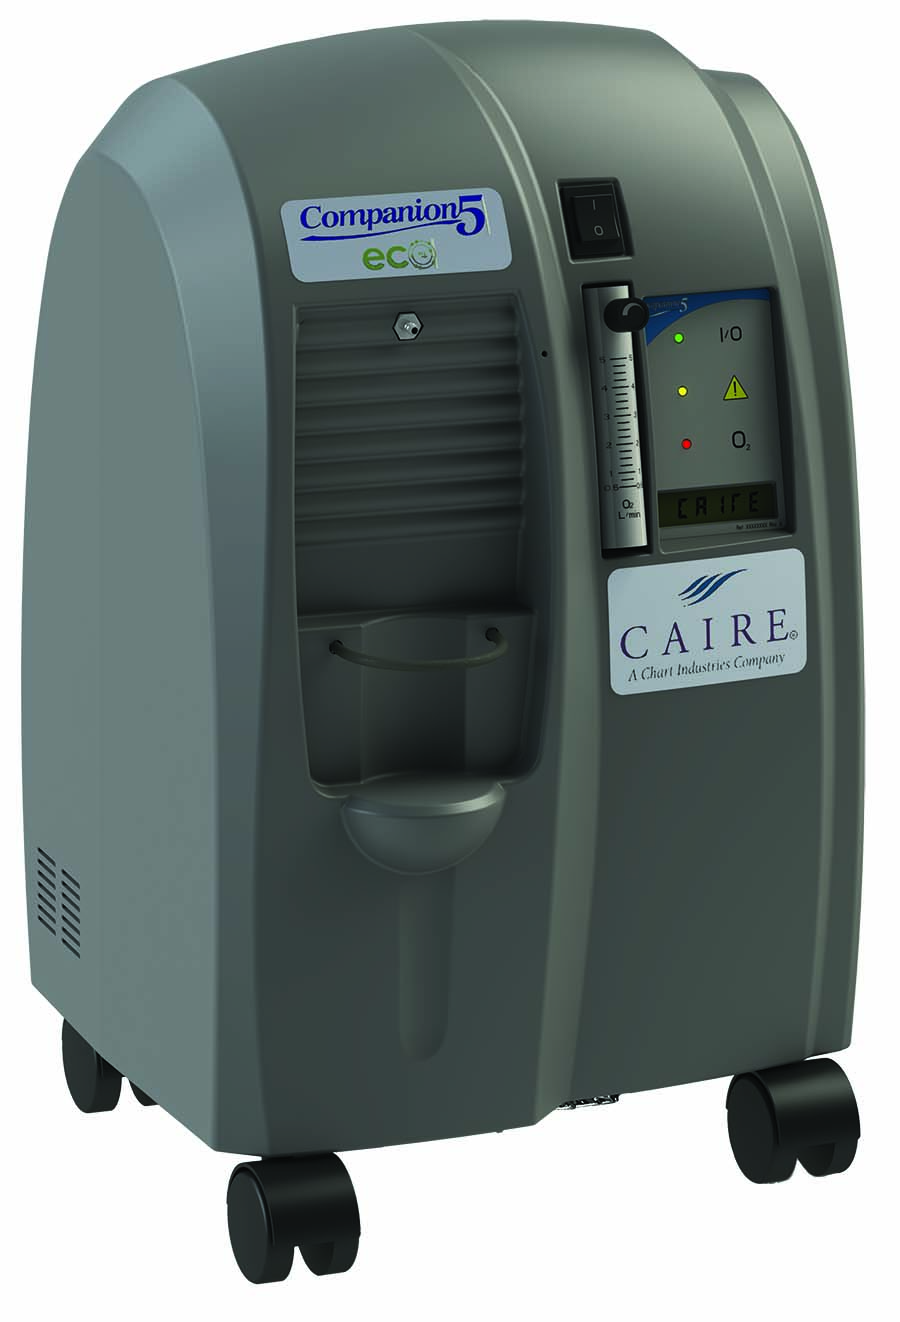 Your Guide to The Caire Companion 5 Home Oxygen Concentrator.